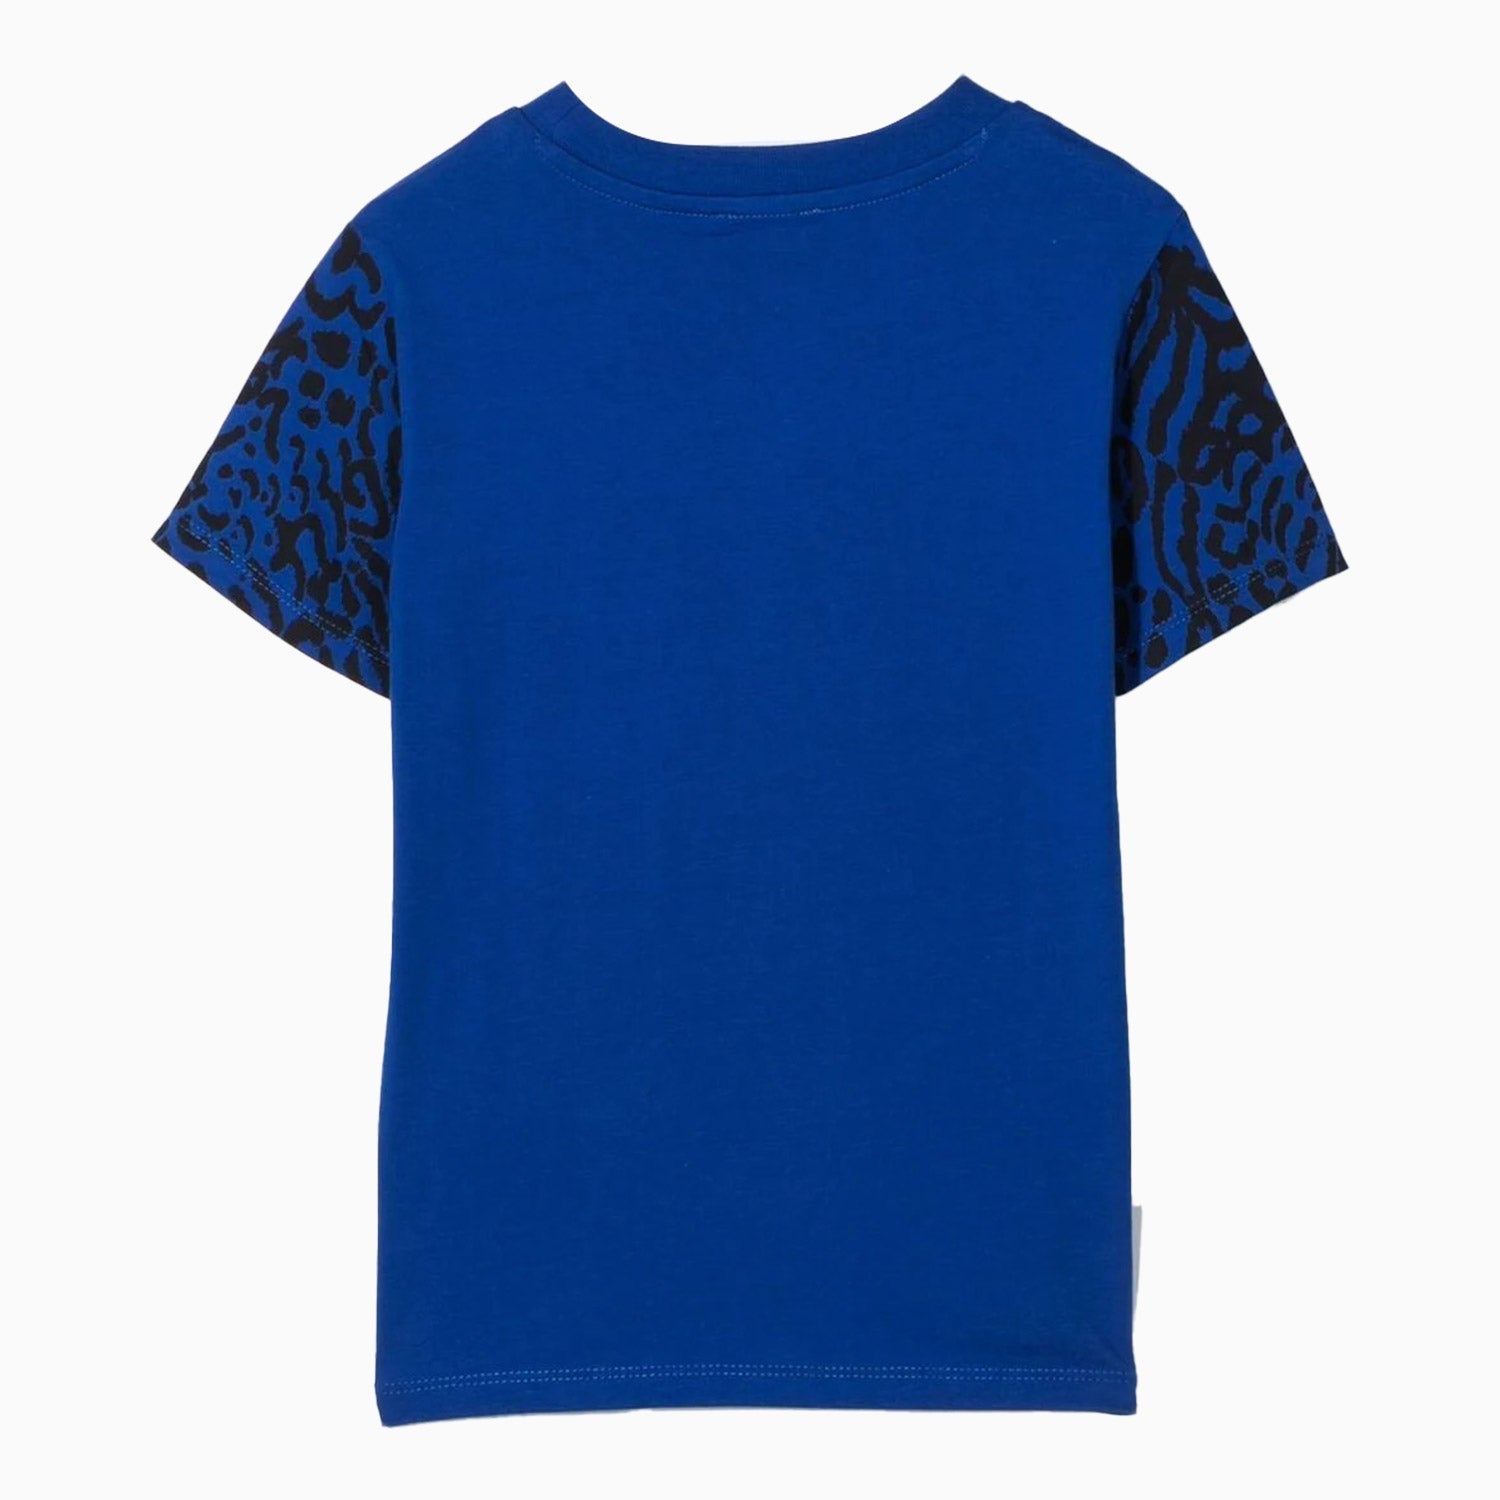 kenzo-kids-tiger-logo-t-shirt-and-short-outfit-k25636-829-k24230-829